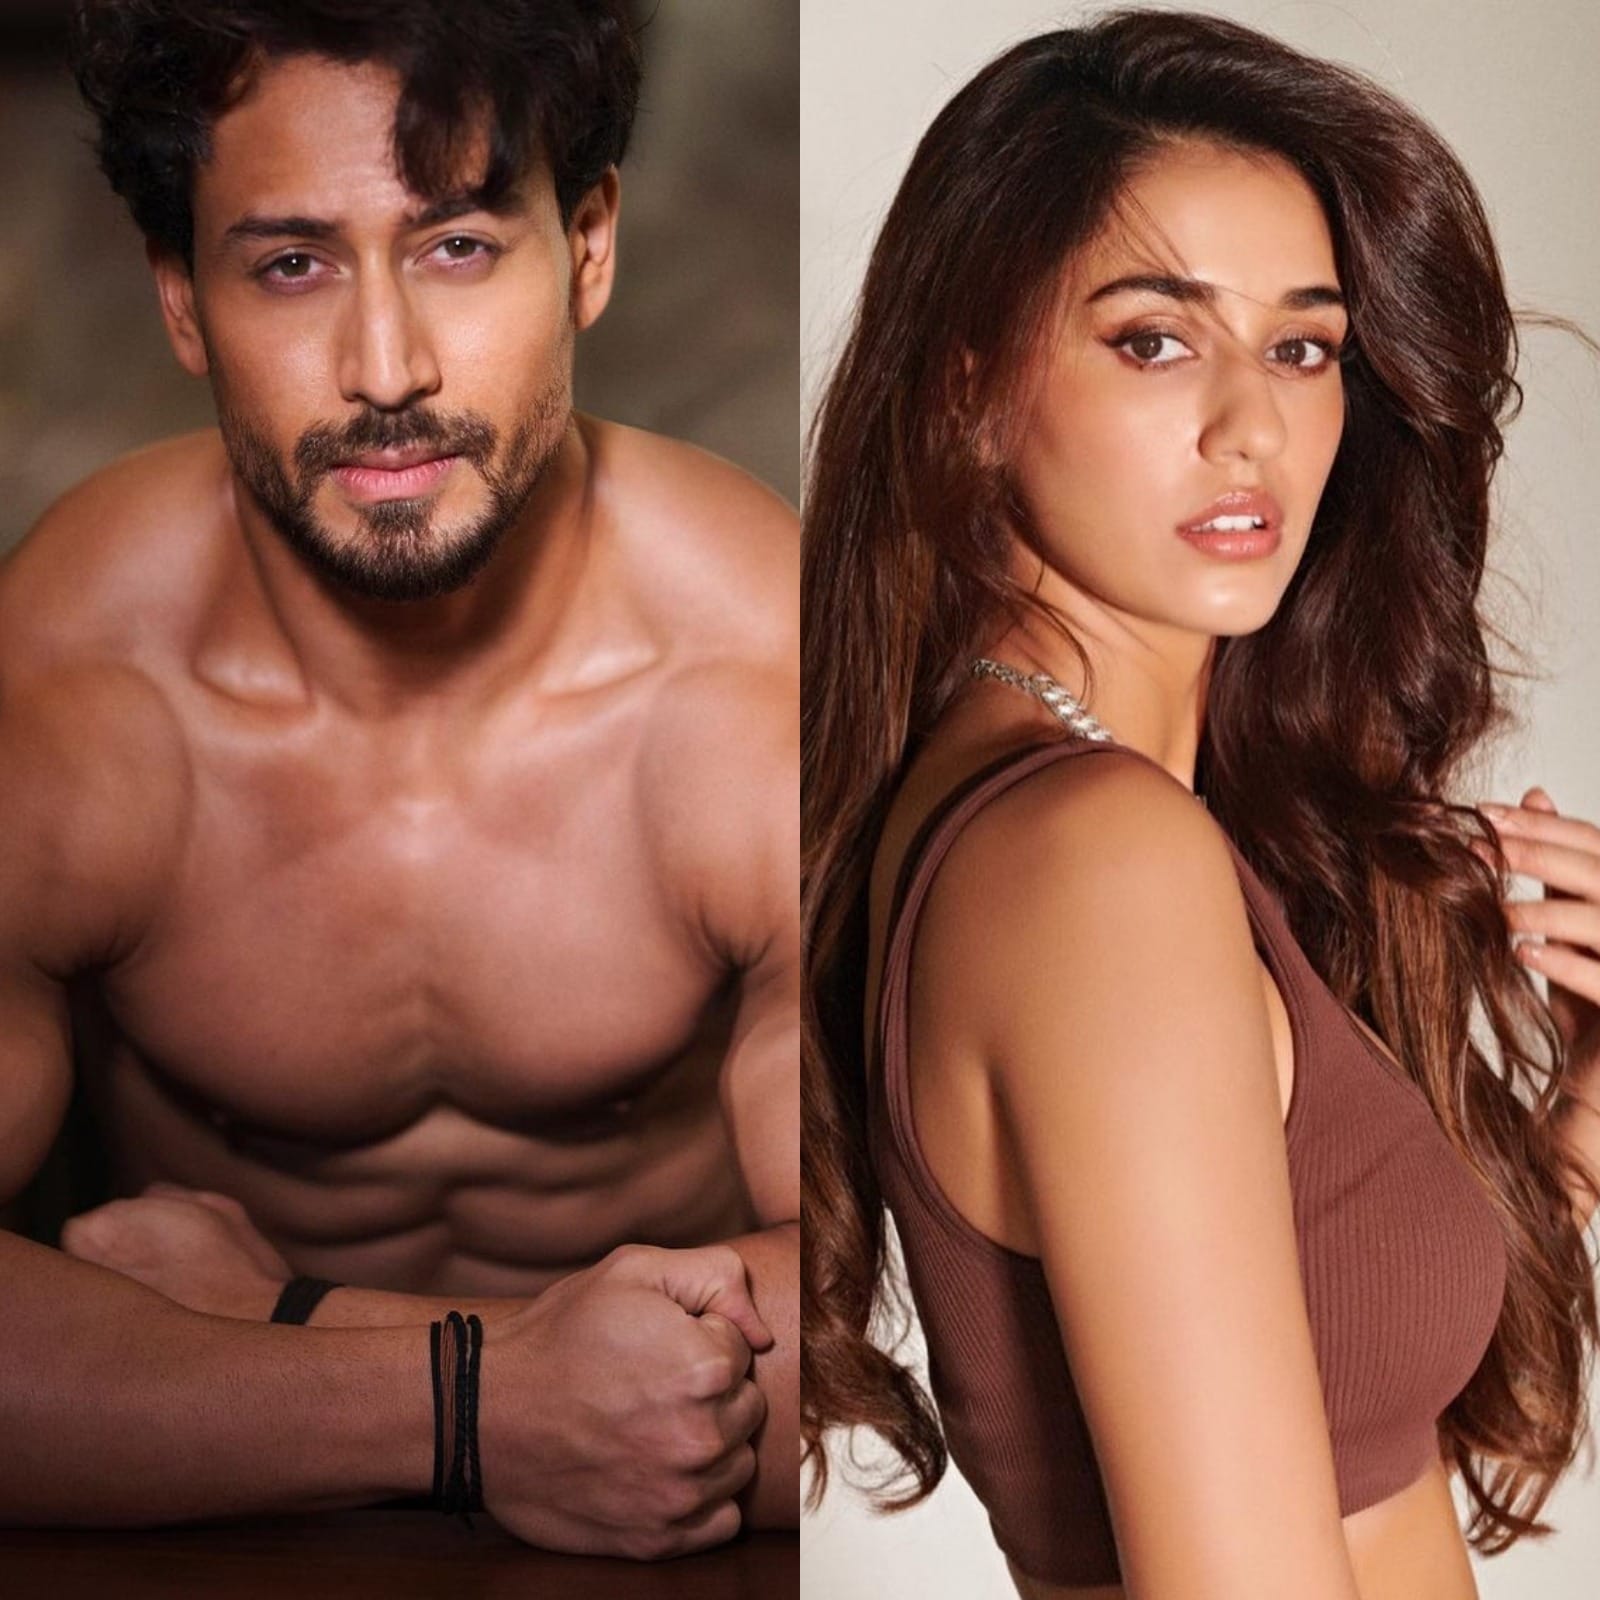 Tiger Shroff And Disha Patani Xxx - Tiger Shroff Shares BTS Video Featuring 'Neck Bursting, Back Breaking'  Action Sequence; Disha Patani Says 'Crazy You Are' - News18